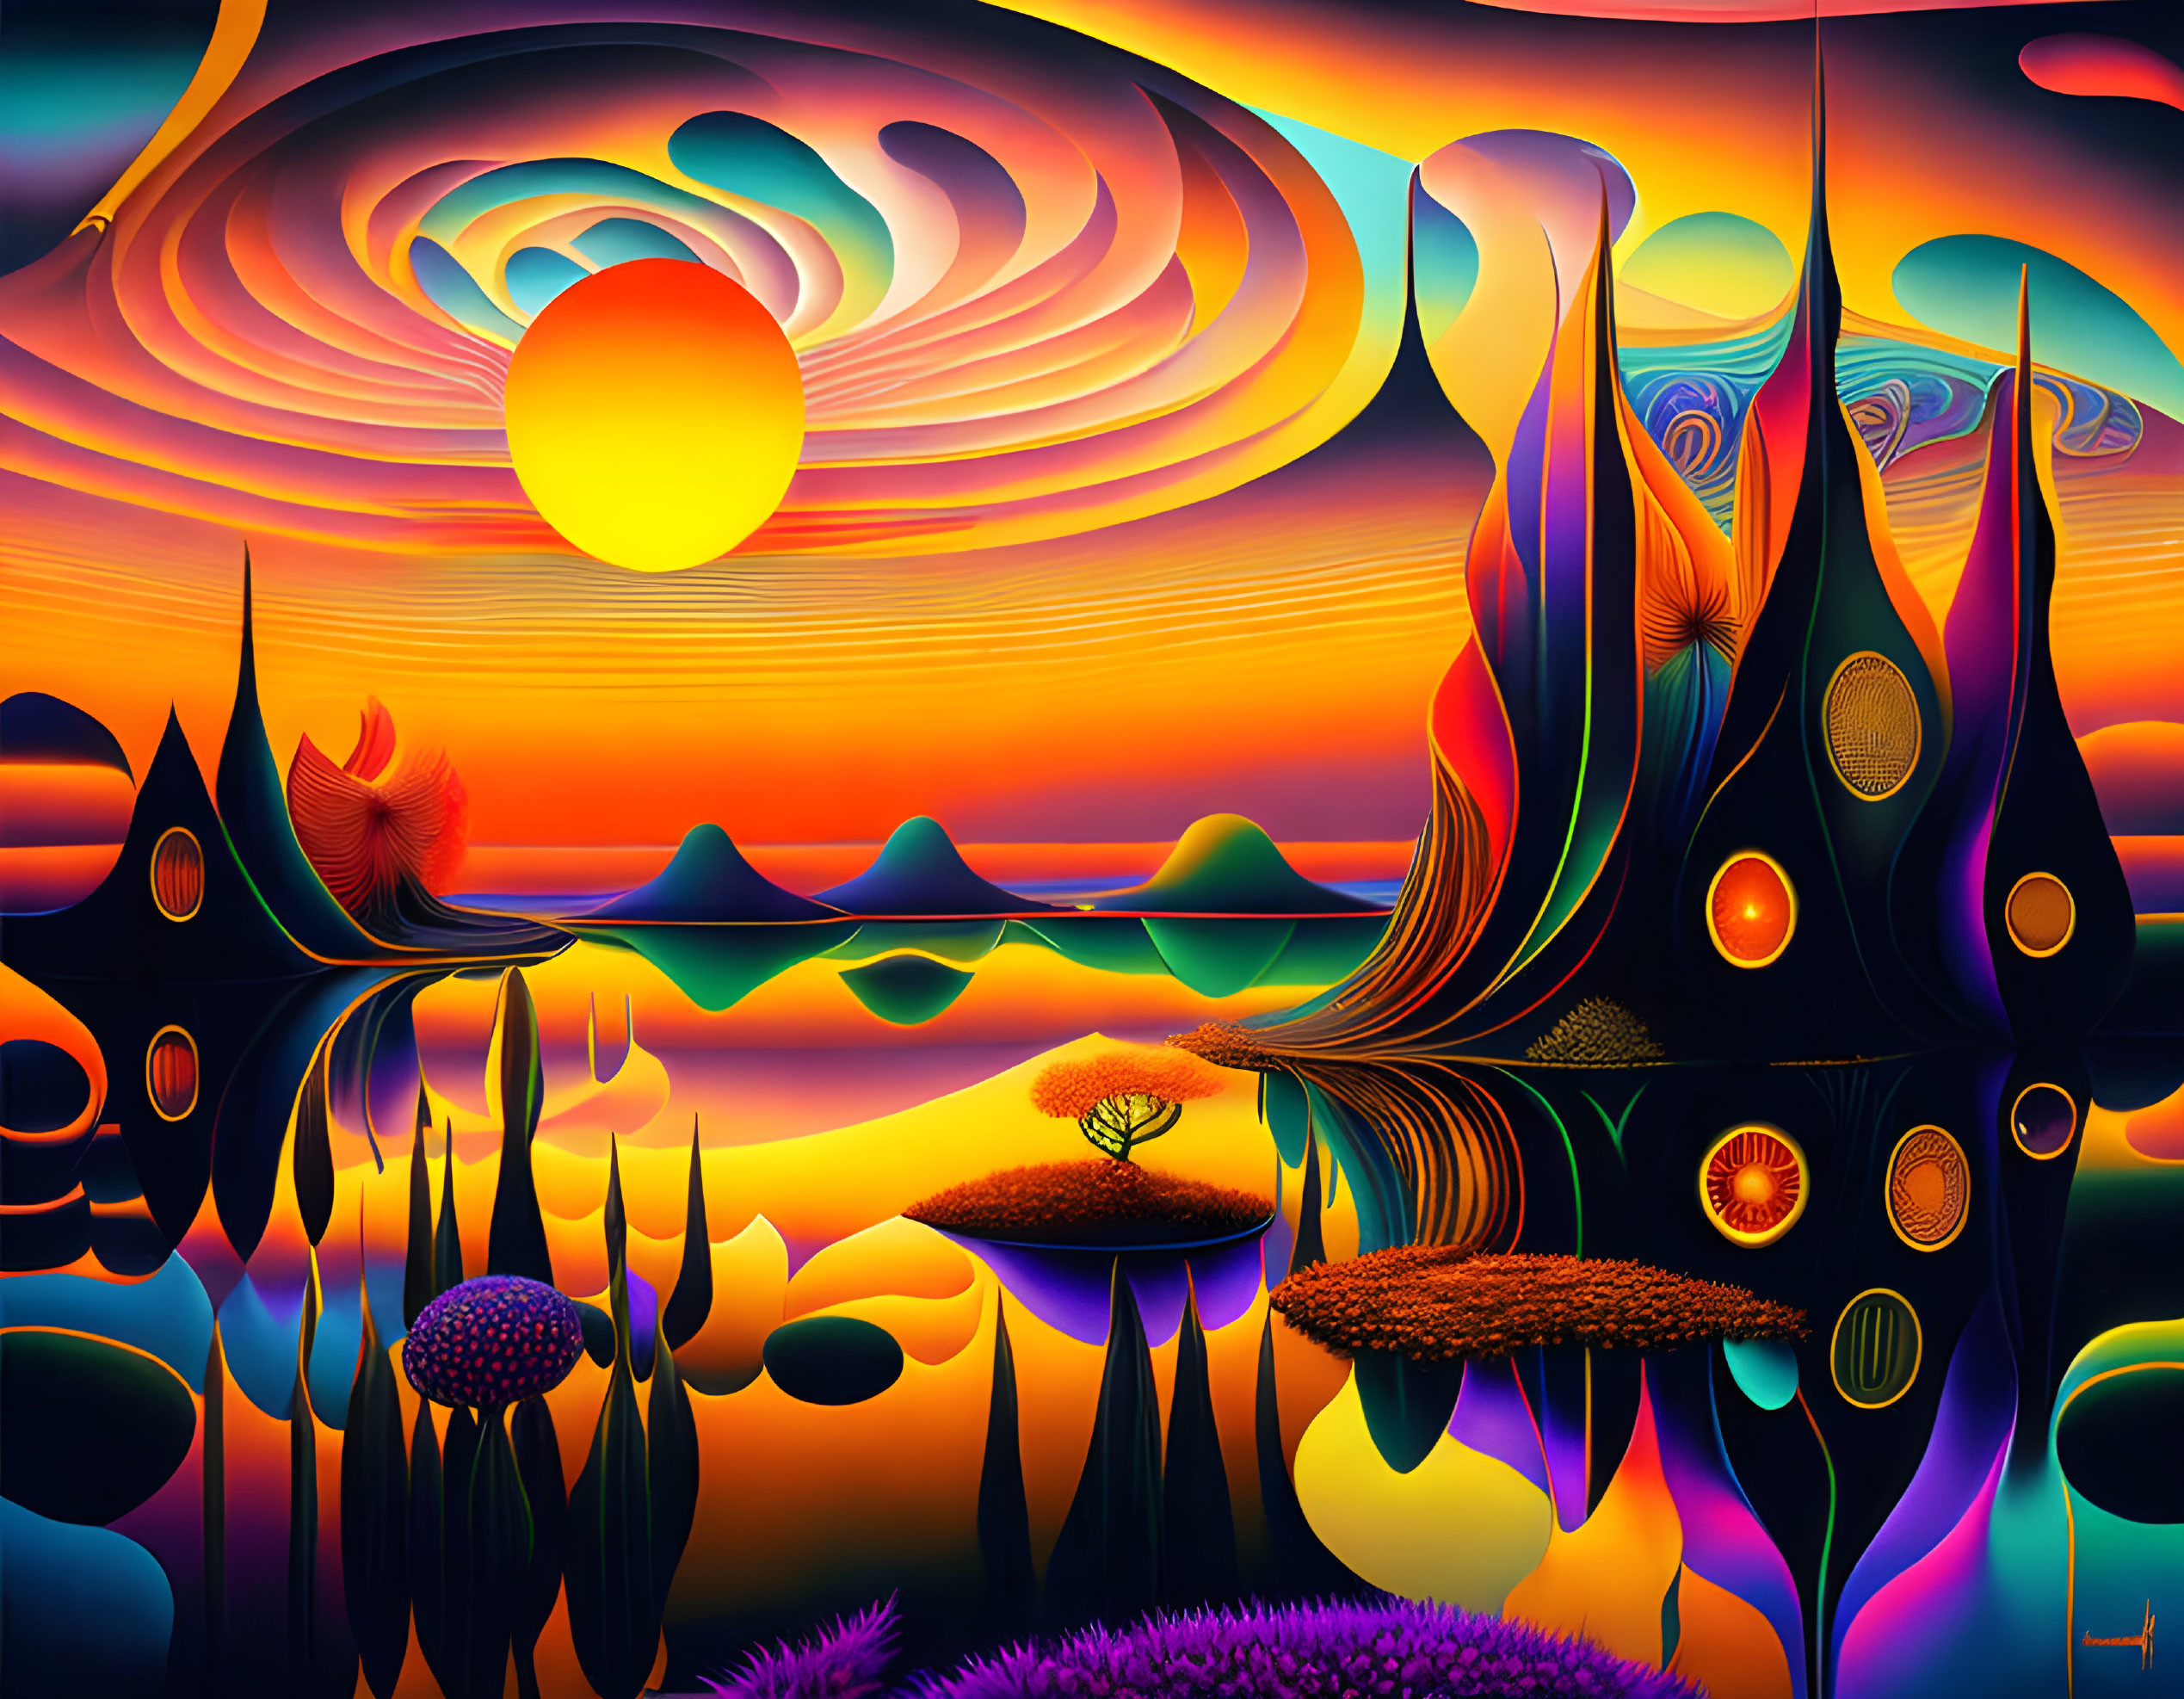 Colorful Swirling Psychedelic Landscape with Abstract Shapes and Setting Sun